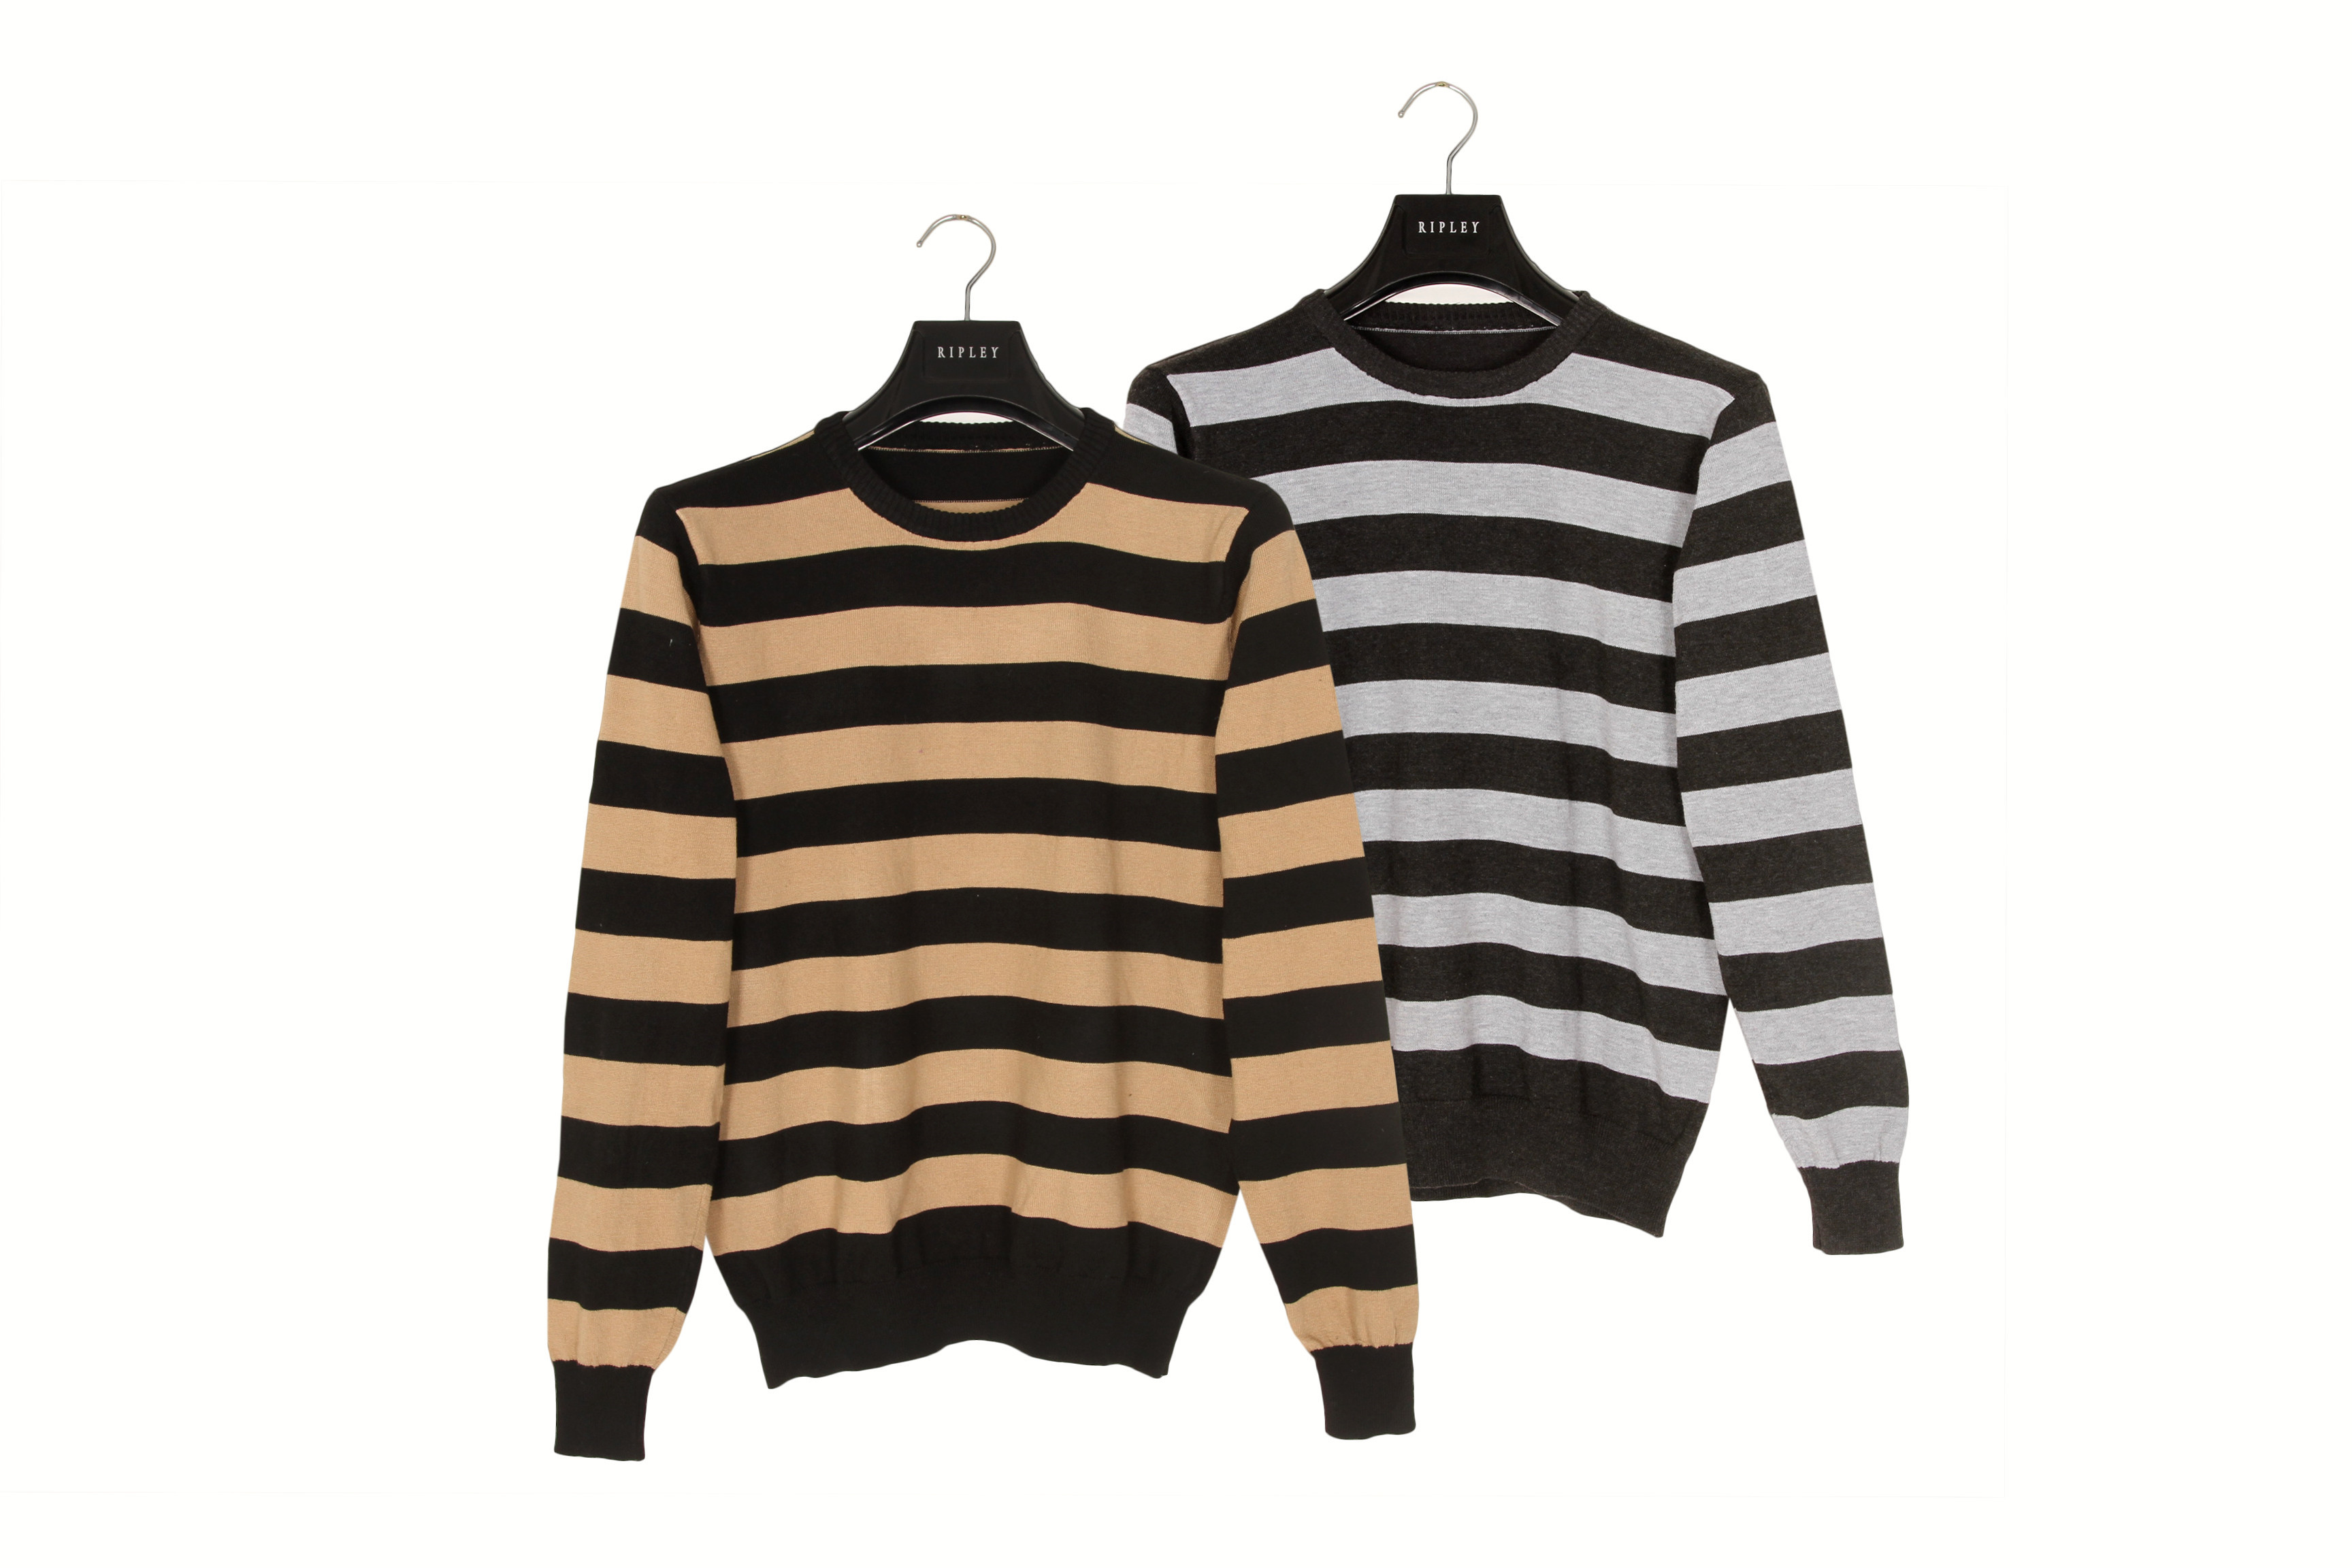 Buy Polyester Womens Striped Long Sleeve Sweater For Autumn at wholesale prices